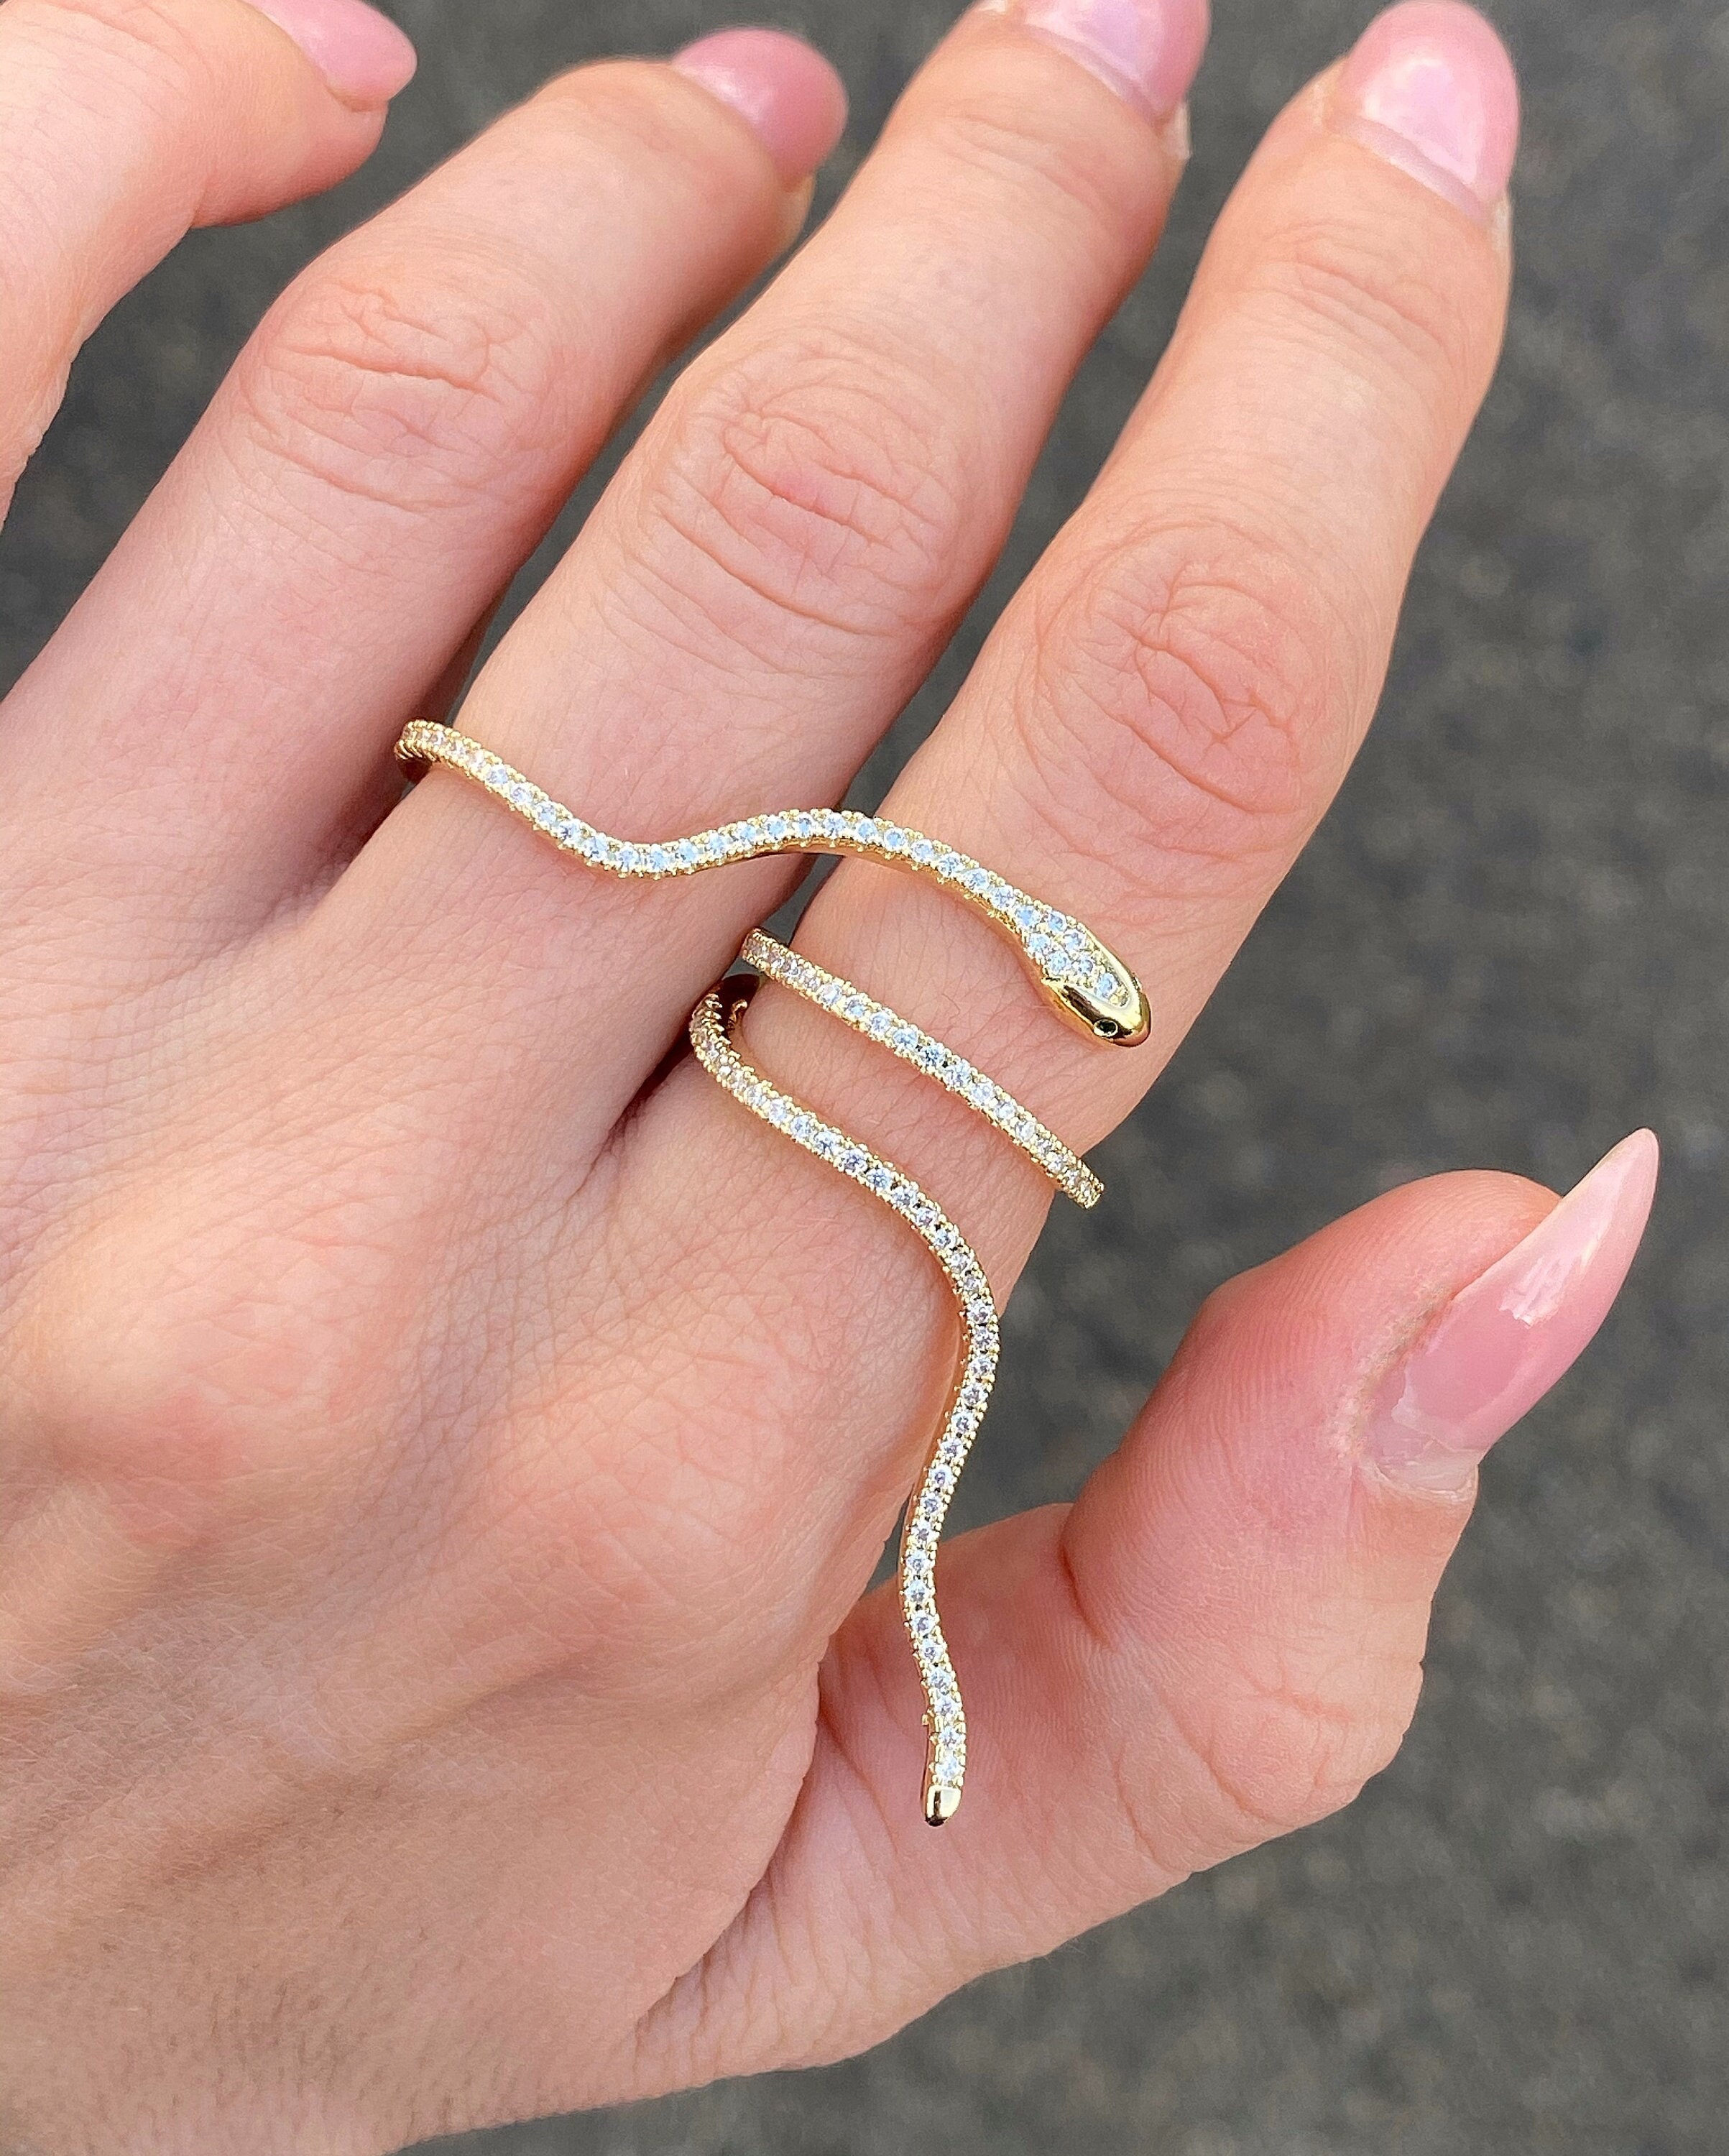 Fashion Snake Shape Knuckle Rings Finger Rings Bohemia Style Rings Jewelry  | eBay